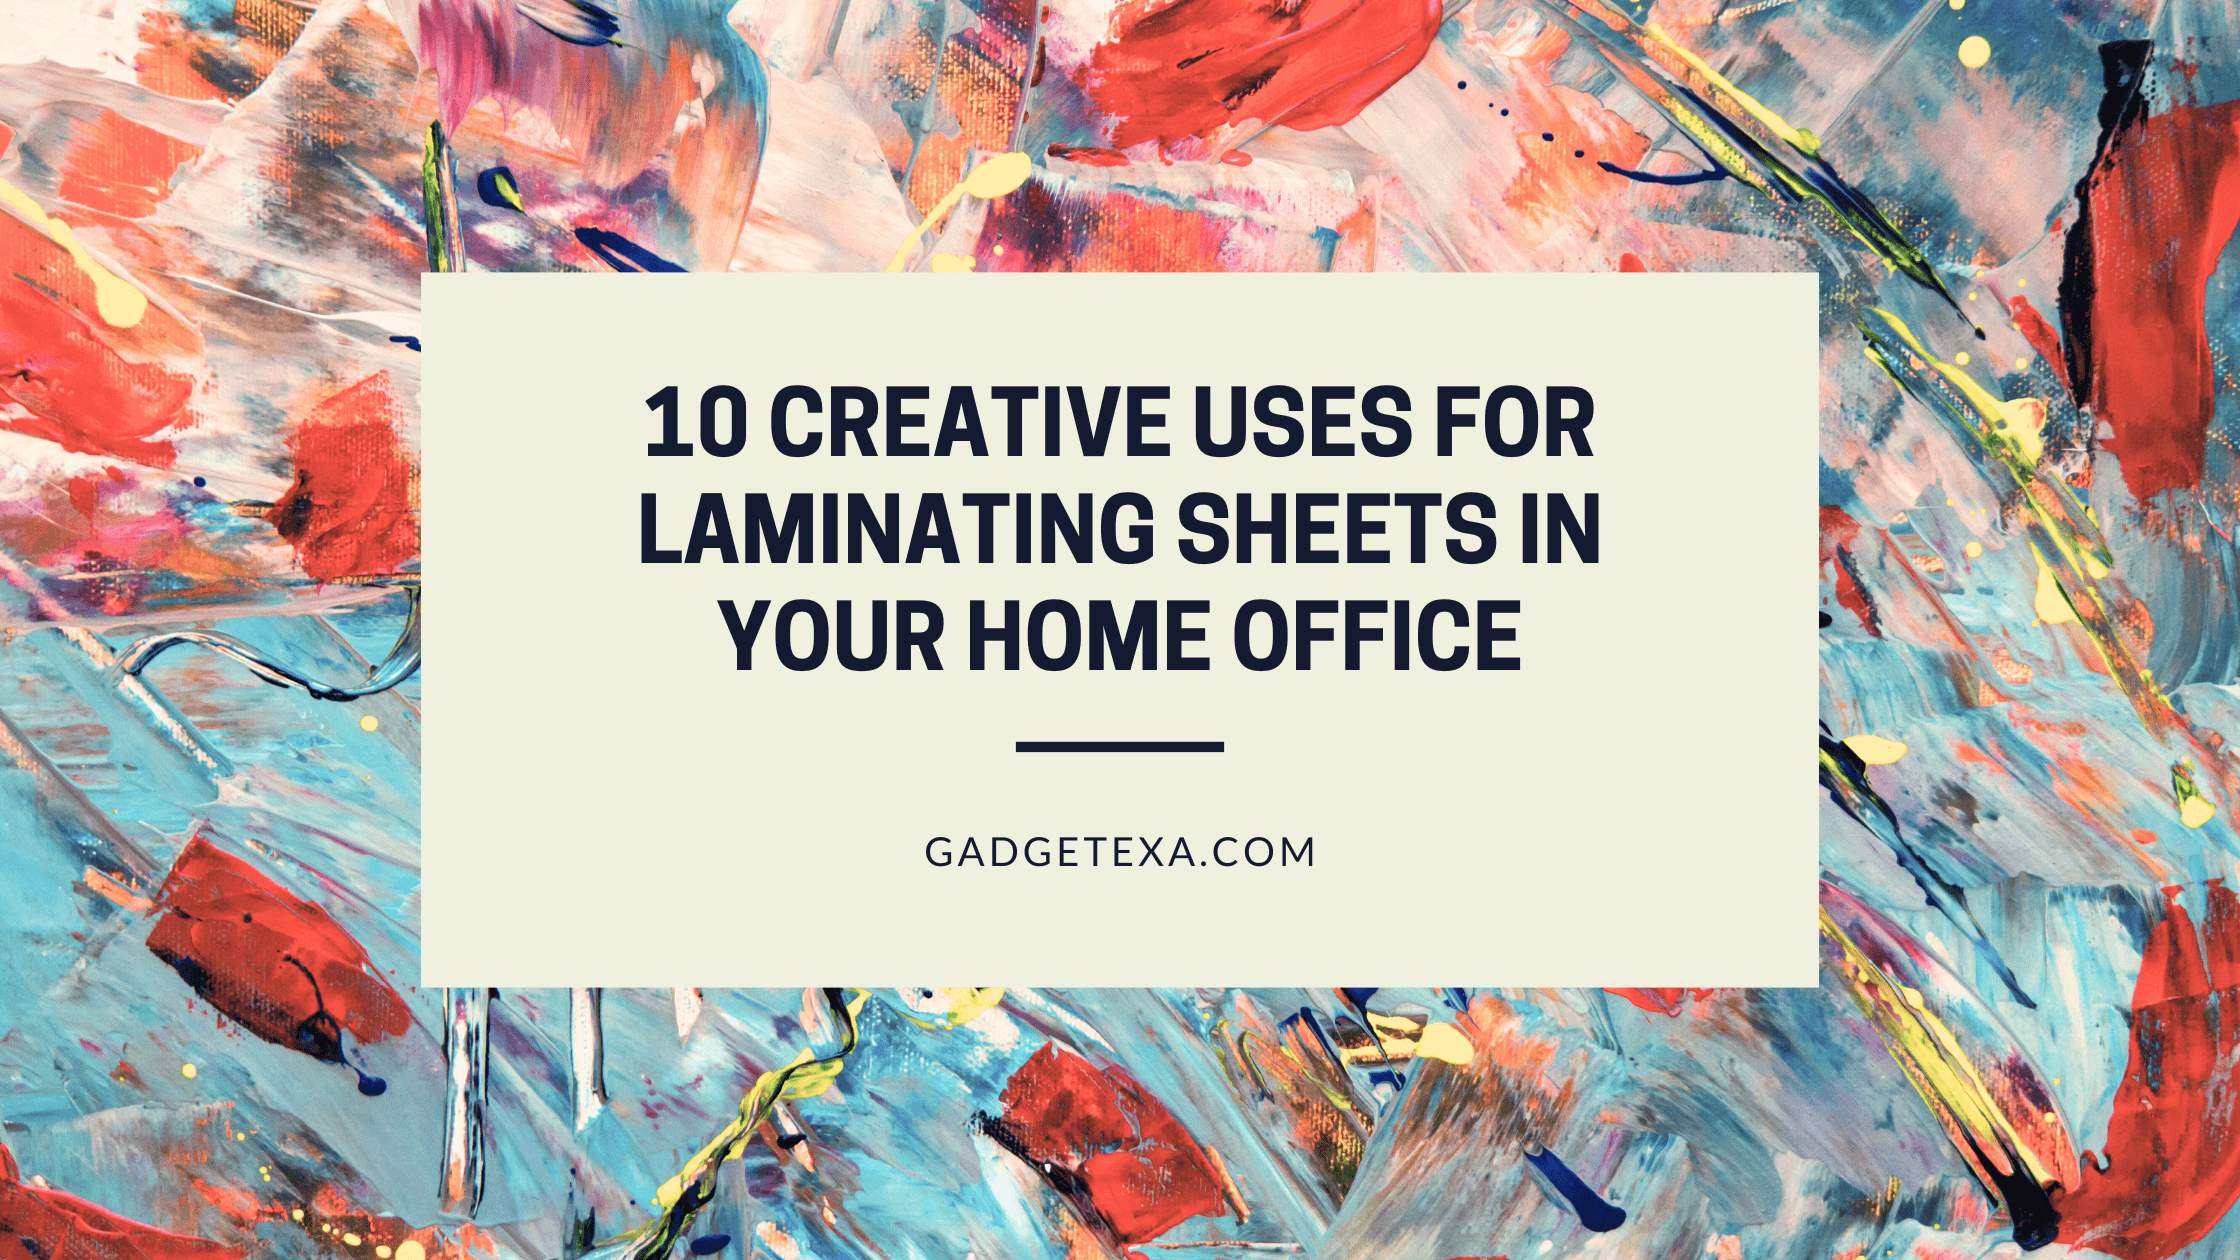 10 Creative Uses for Laminating Sheets in Your Home Office